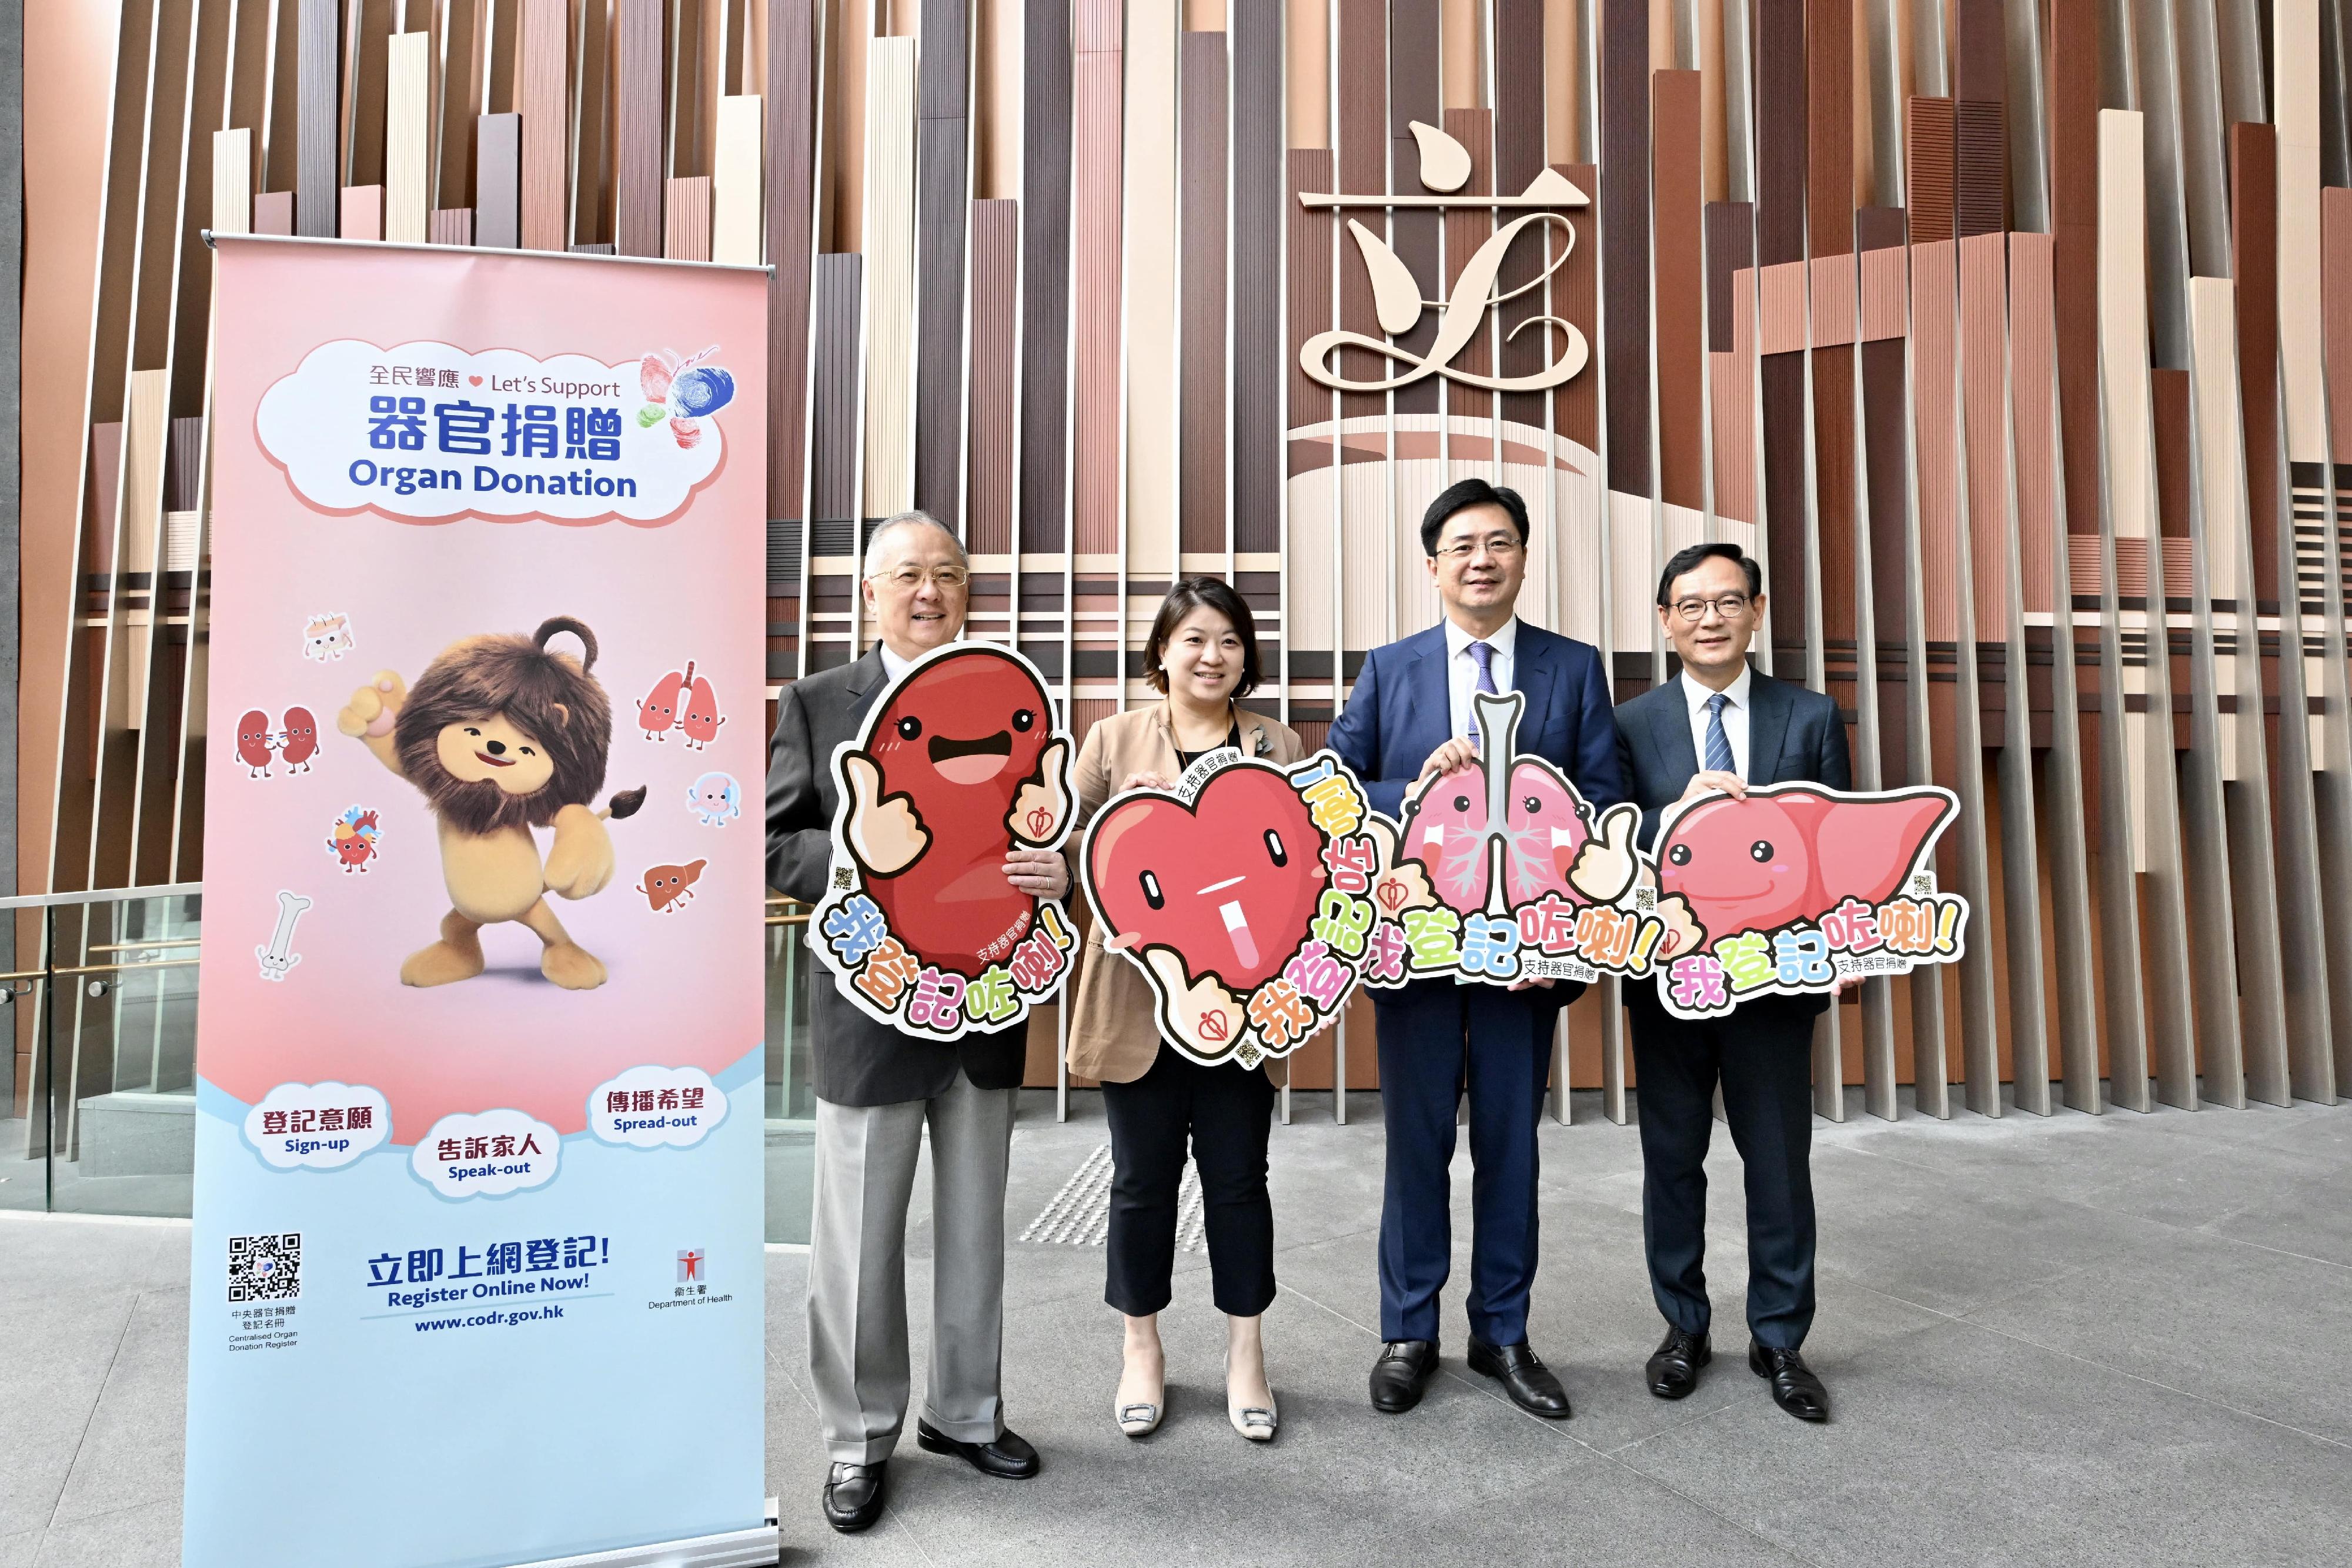 The Under Secretary for Health, Dr Libby Lee (second left), joined by several Members of the Legislative Council (LegCo) at the LegCo Complex today (June 7), calls for continued support from the public on organ donations.